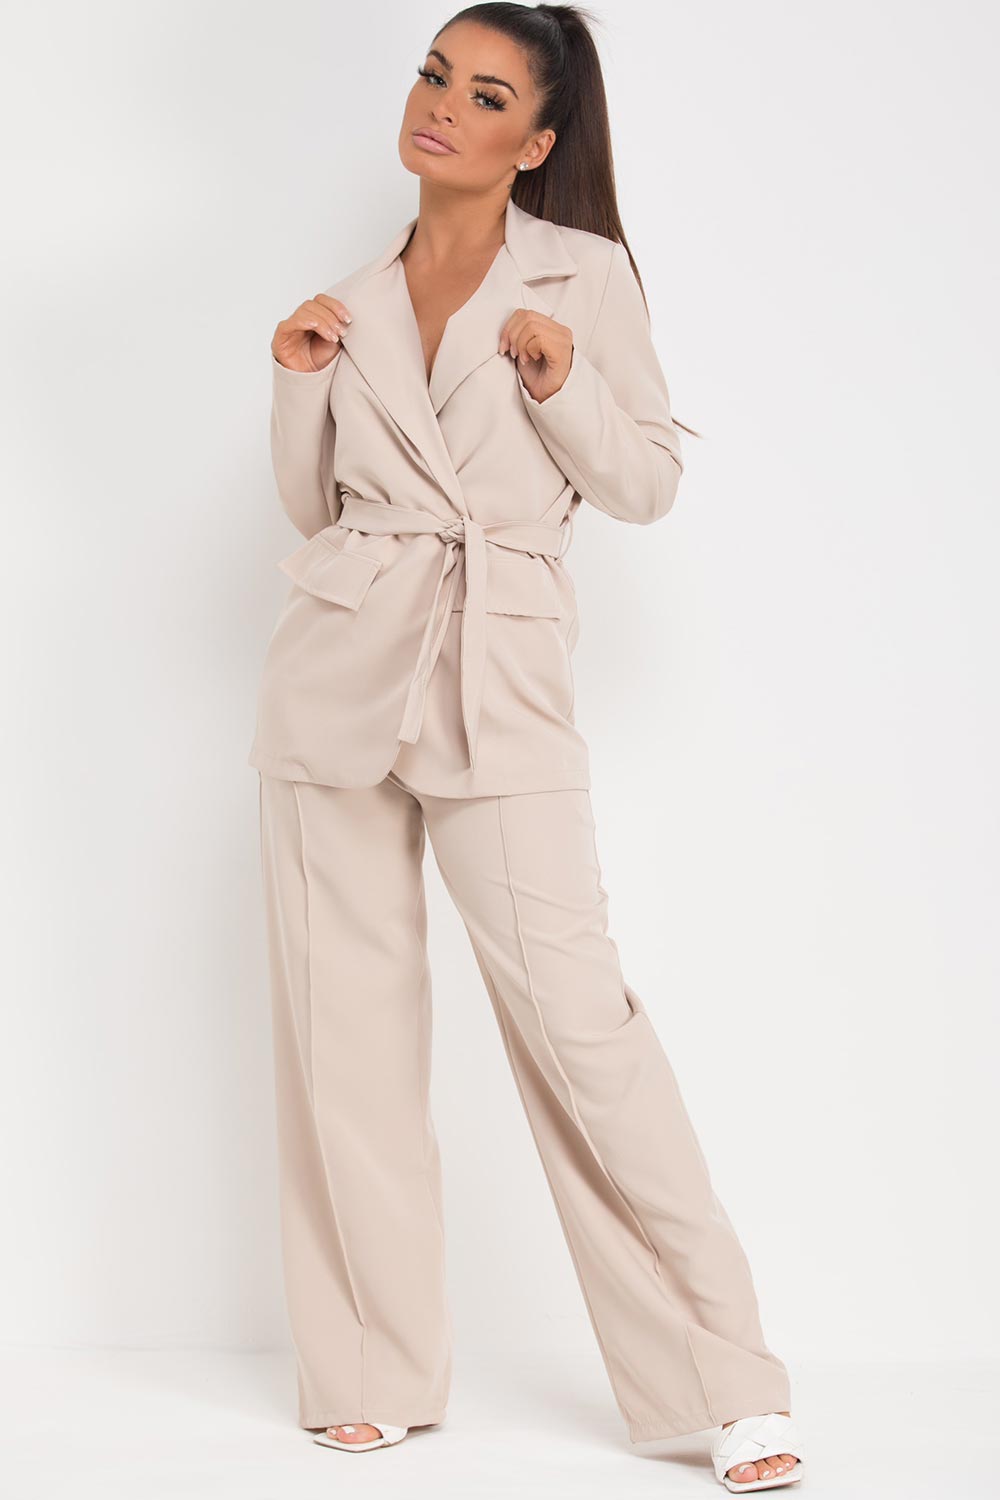 Belted Blazer And Wide Leg Trousers Set Stone Two Piece Co-Ord